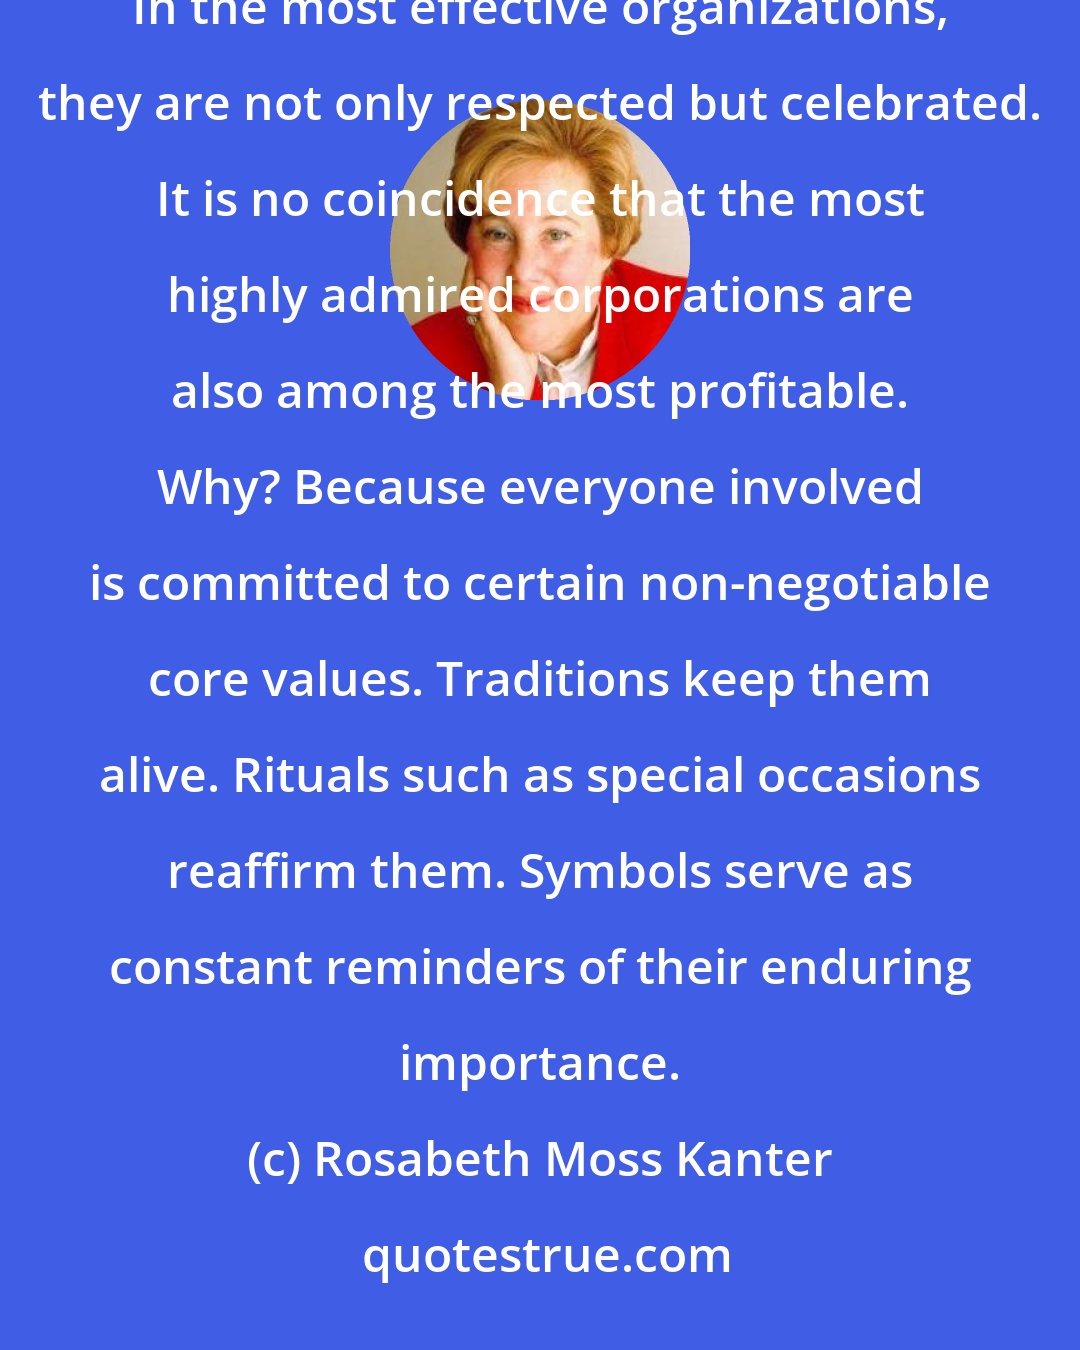 Rosabeth Moss Kanter: Throughout human history, people have developed strong loyalties to traditions, rituals, and symbols. In the most effective organizations, they are not only respected but celebrated. It is no coincidence that the most highly admired corporations are also among the most profitable. Why? Because everyone involved is committed to certain non-negotiable core values. Traditions keep them alive. Rituals such as special occasions reaffirm them. Symbols serve as constant reminders of their enduring importance.